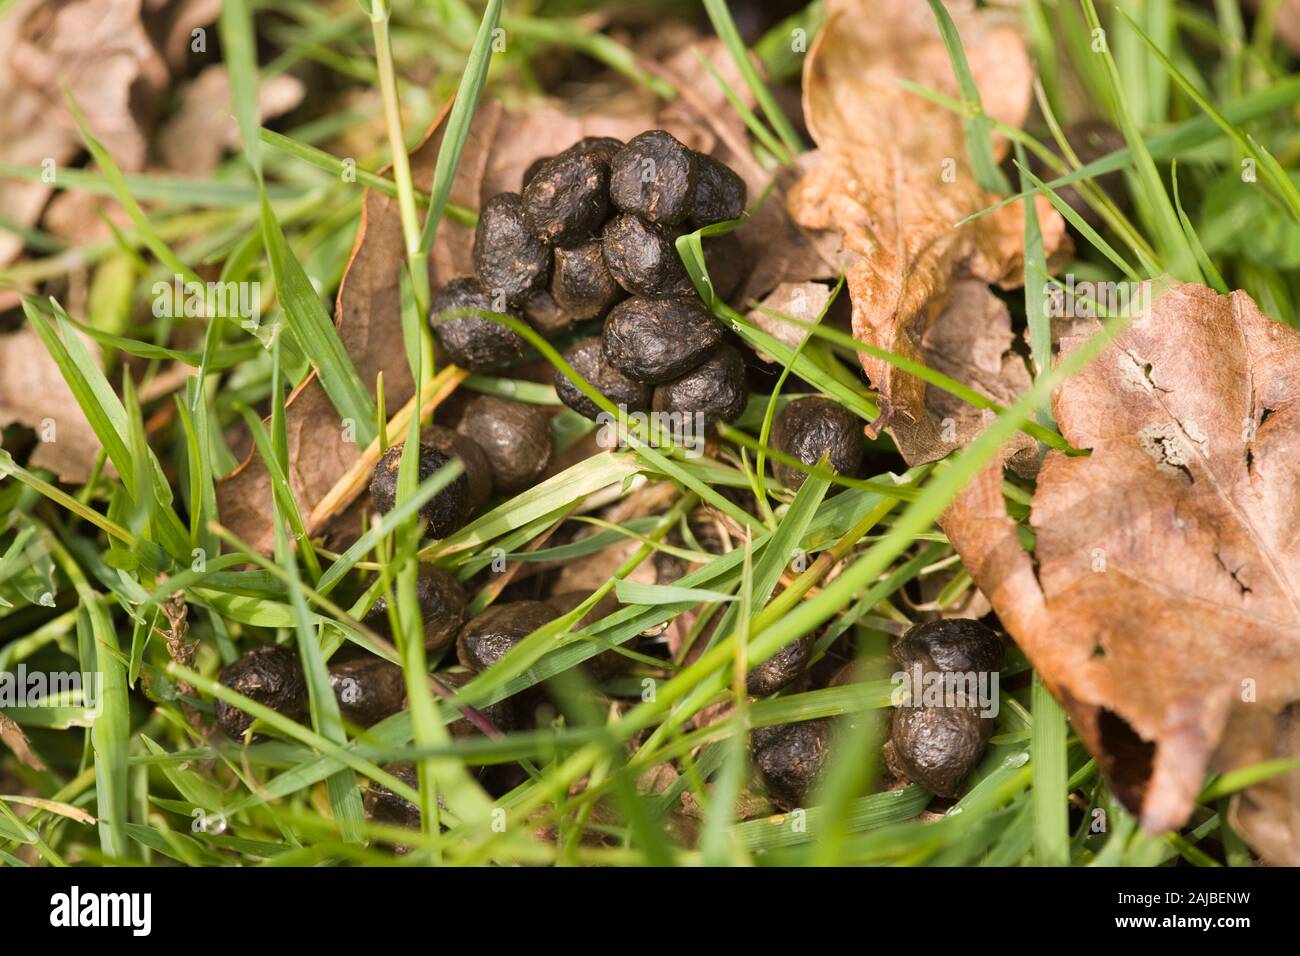 MUNTJAC DEER (Muntiacus reevesi).  Defecations or 'droppings' deposited on a garden grass lawn. Oak leaves (Quercus robur), give a size comparison. Stock Photo